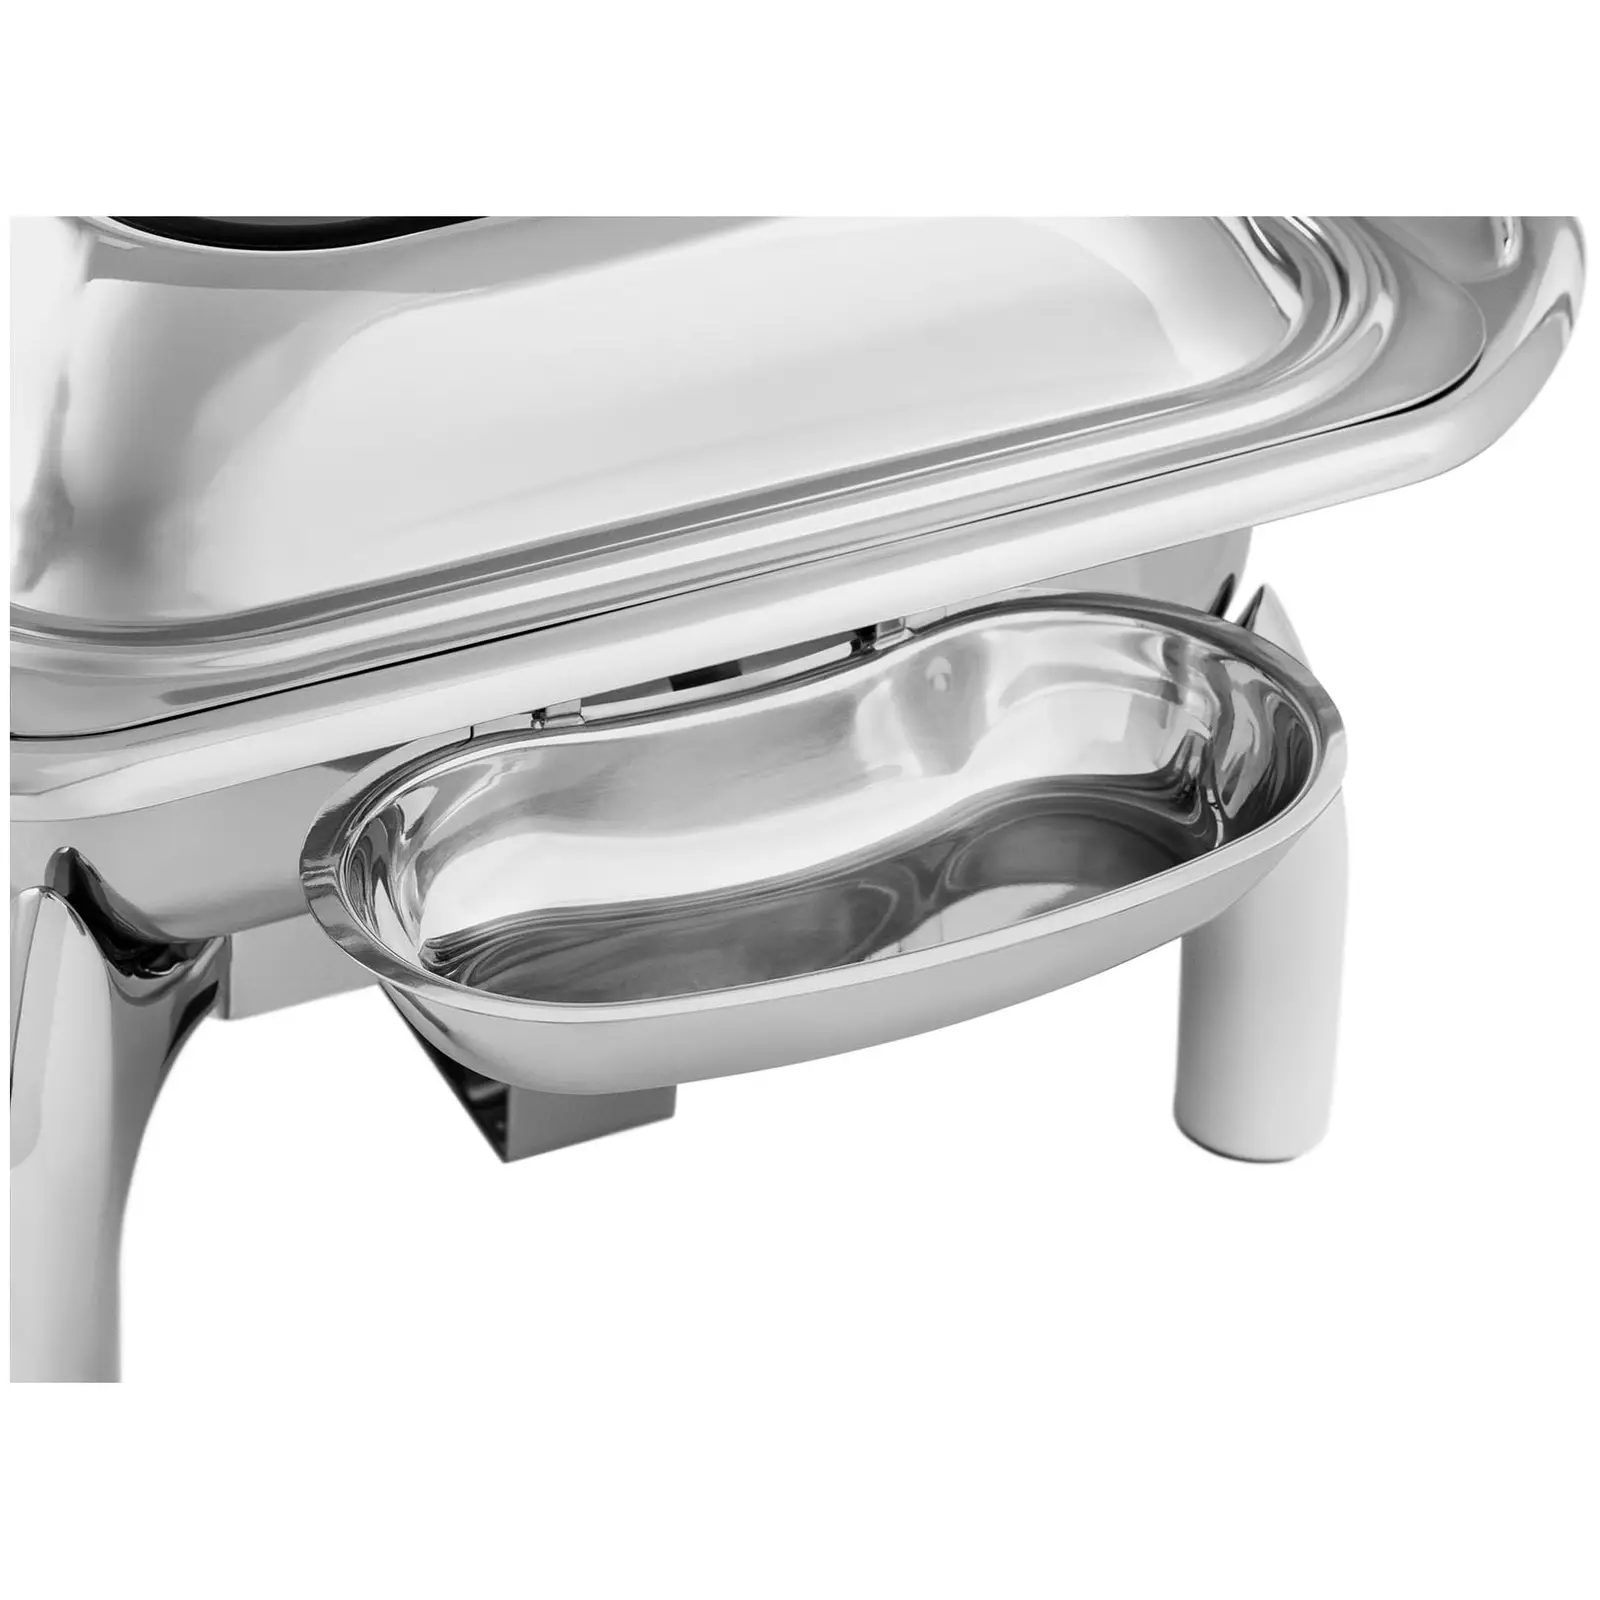 Chafing dish - GN 1/1 - Royal Catering - 8,5 l - 2 bruleurs